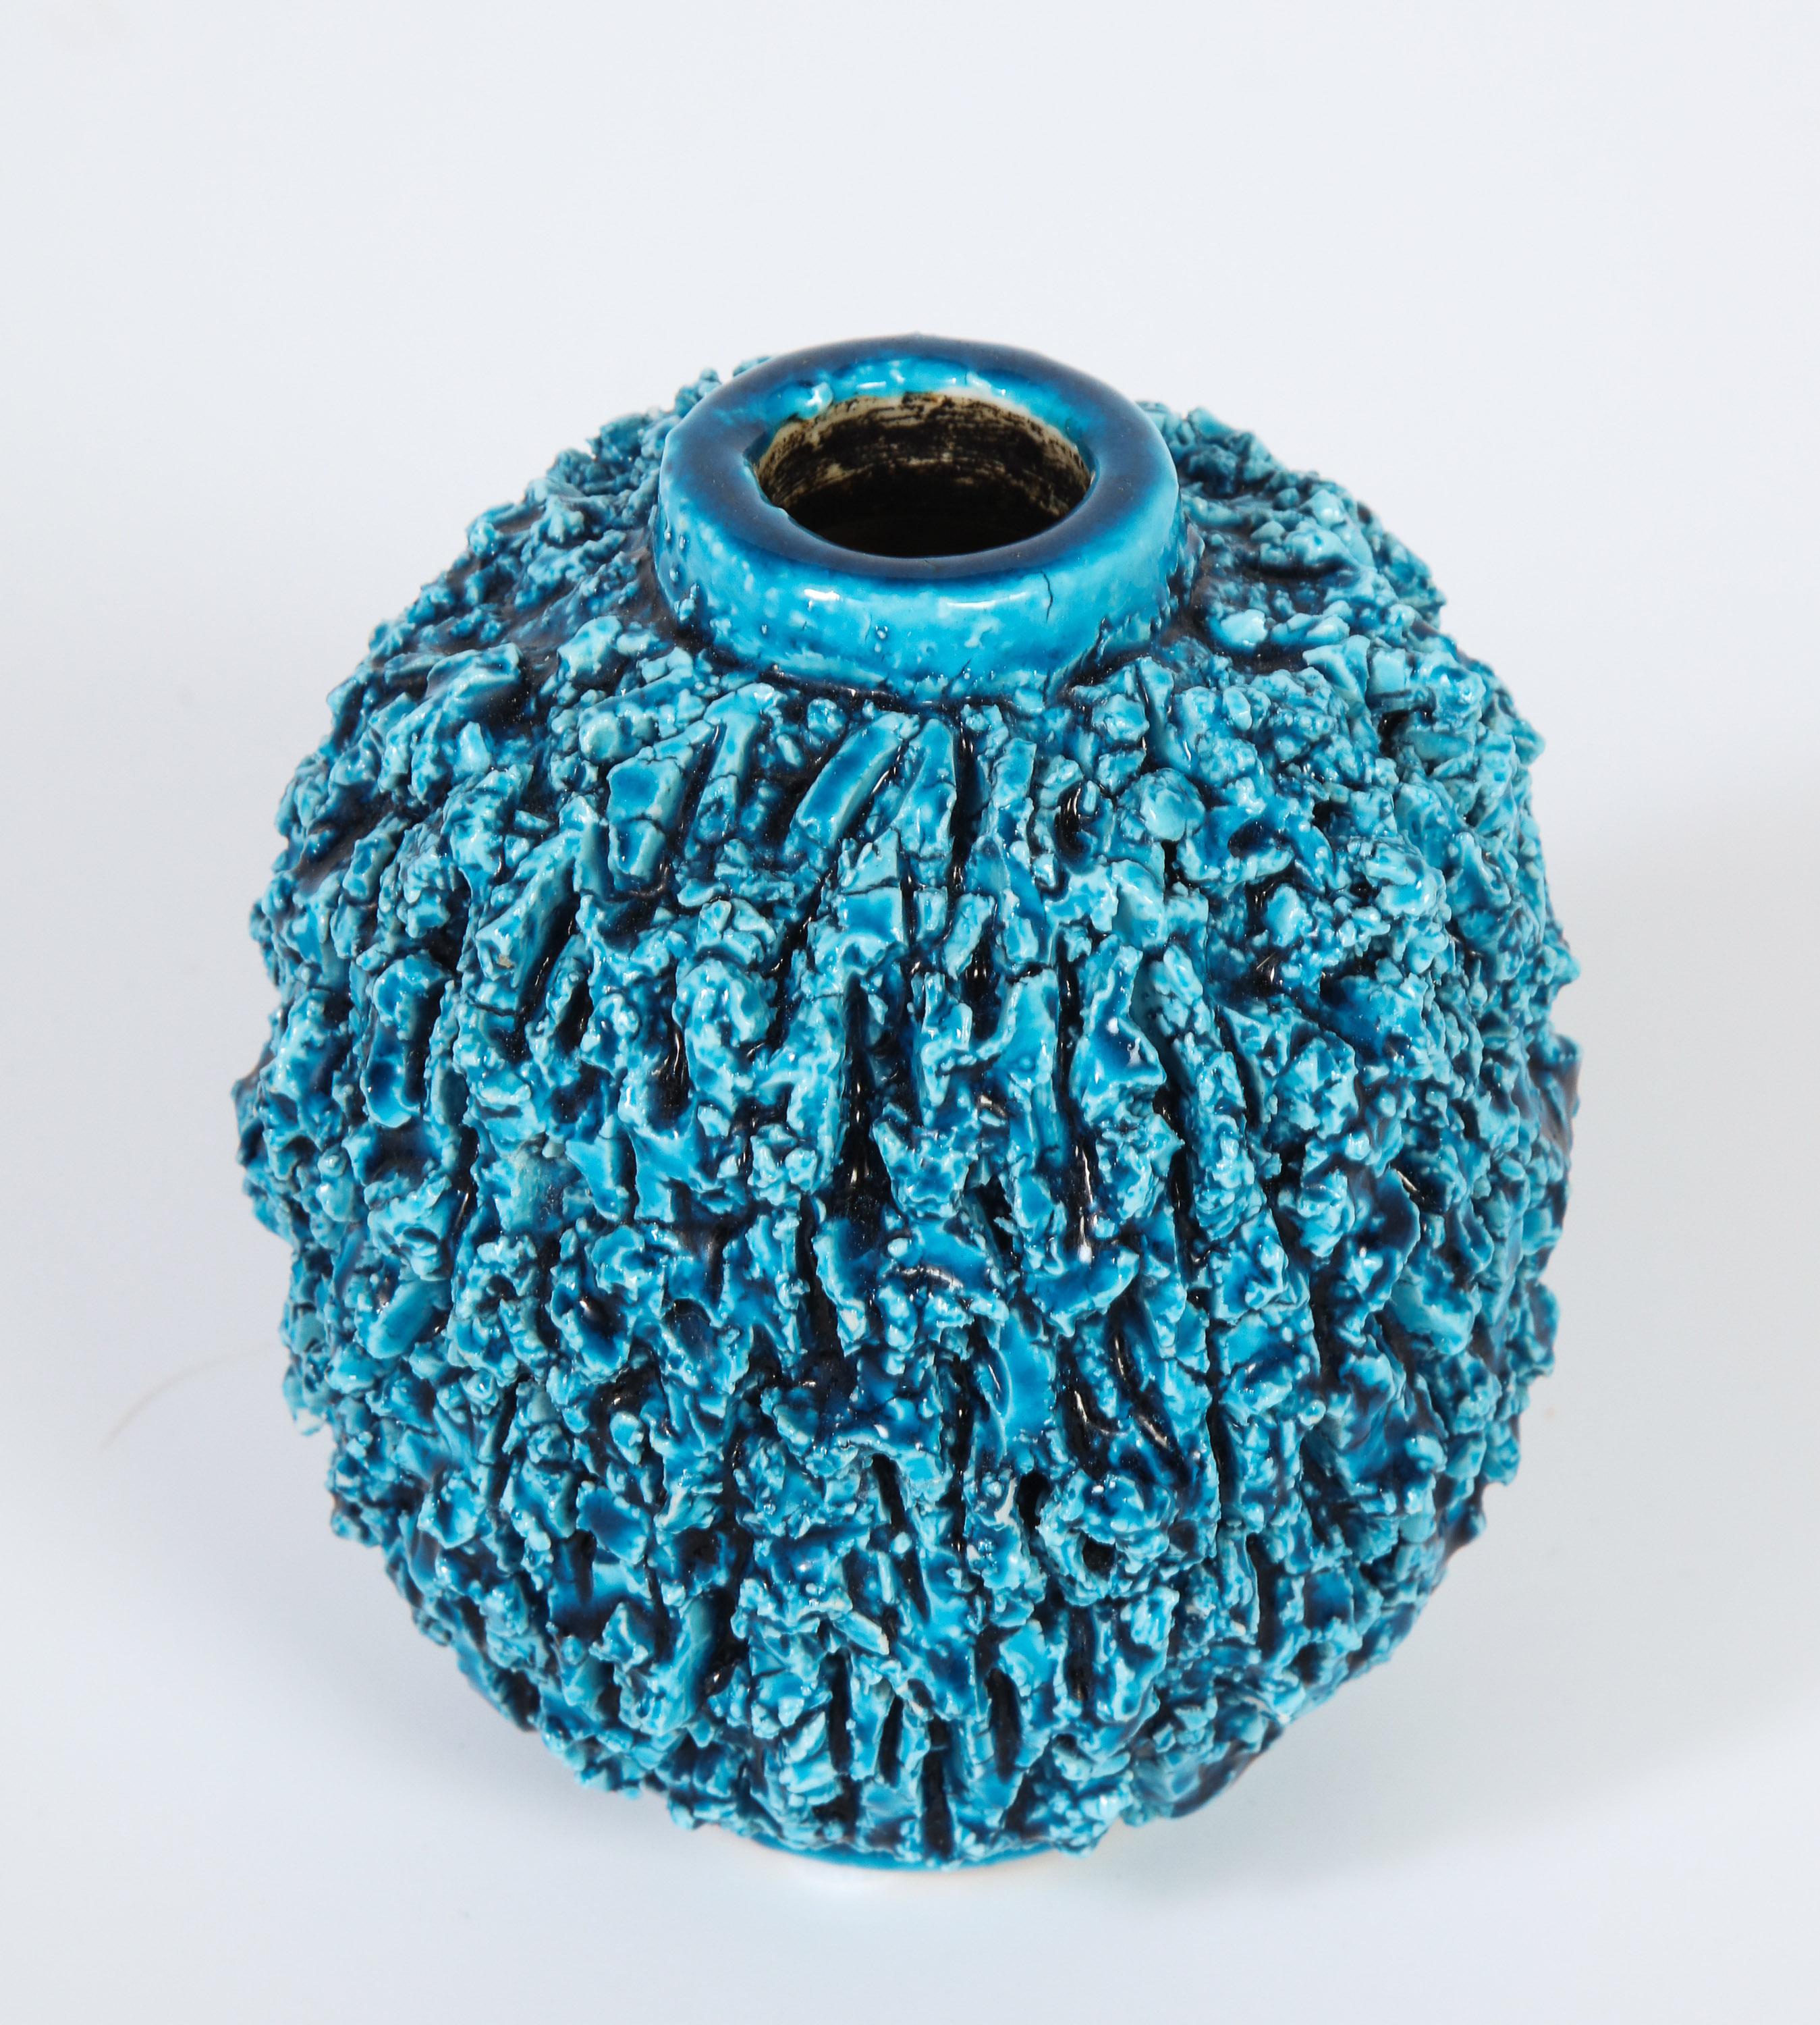 Decorative ceramic vase by Gunnar Nylund, Sweden, circa 1950. This is the smaller vase of a group called 